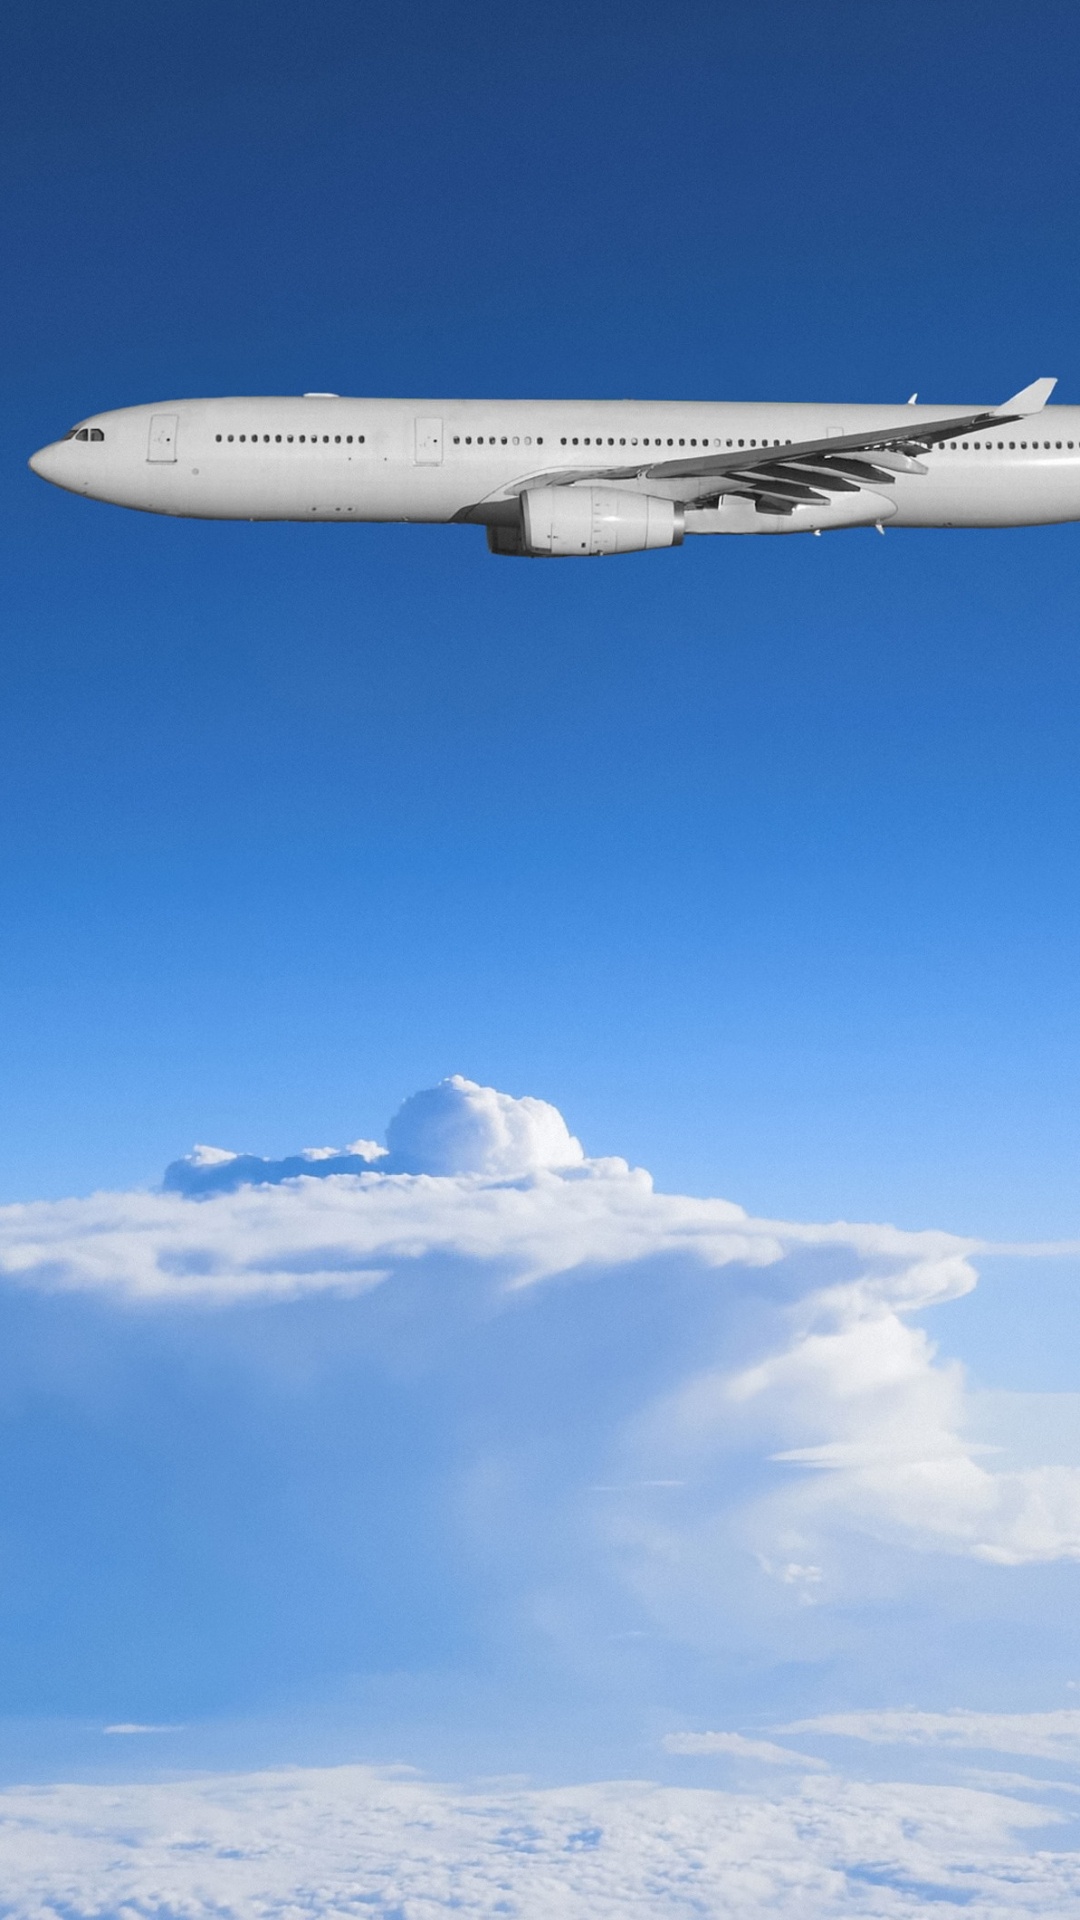 White Airplane Flying Under Blue Sky During Daytime. Wallpaper in 1080x1920 Resolution